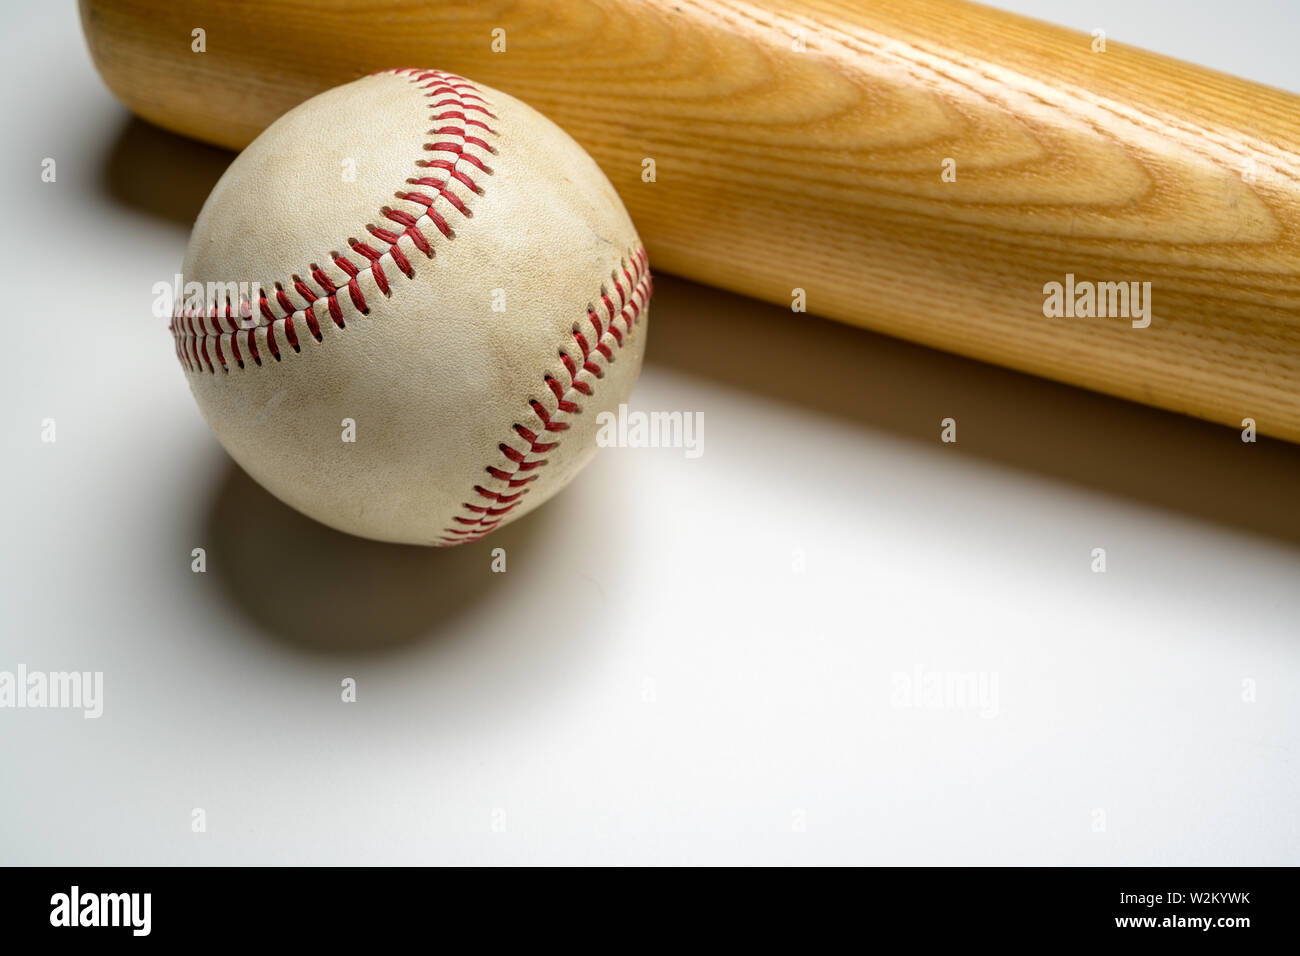 A wooden baseball bat and leather ball on white background Stock Photo